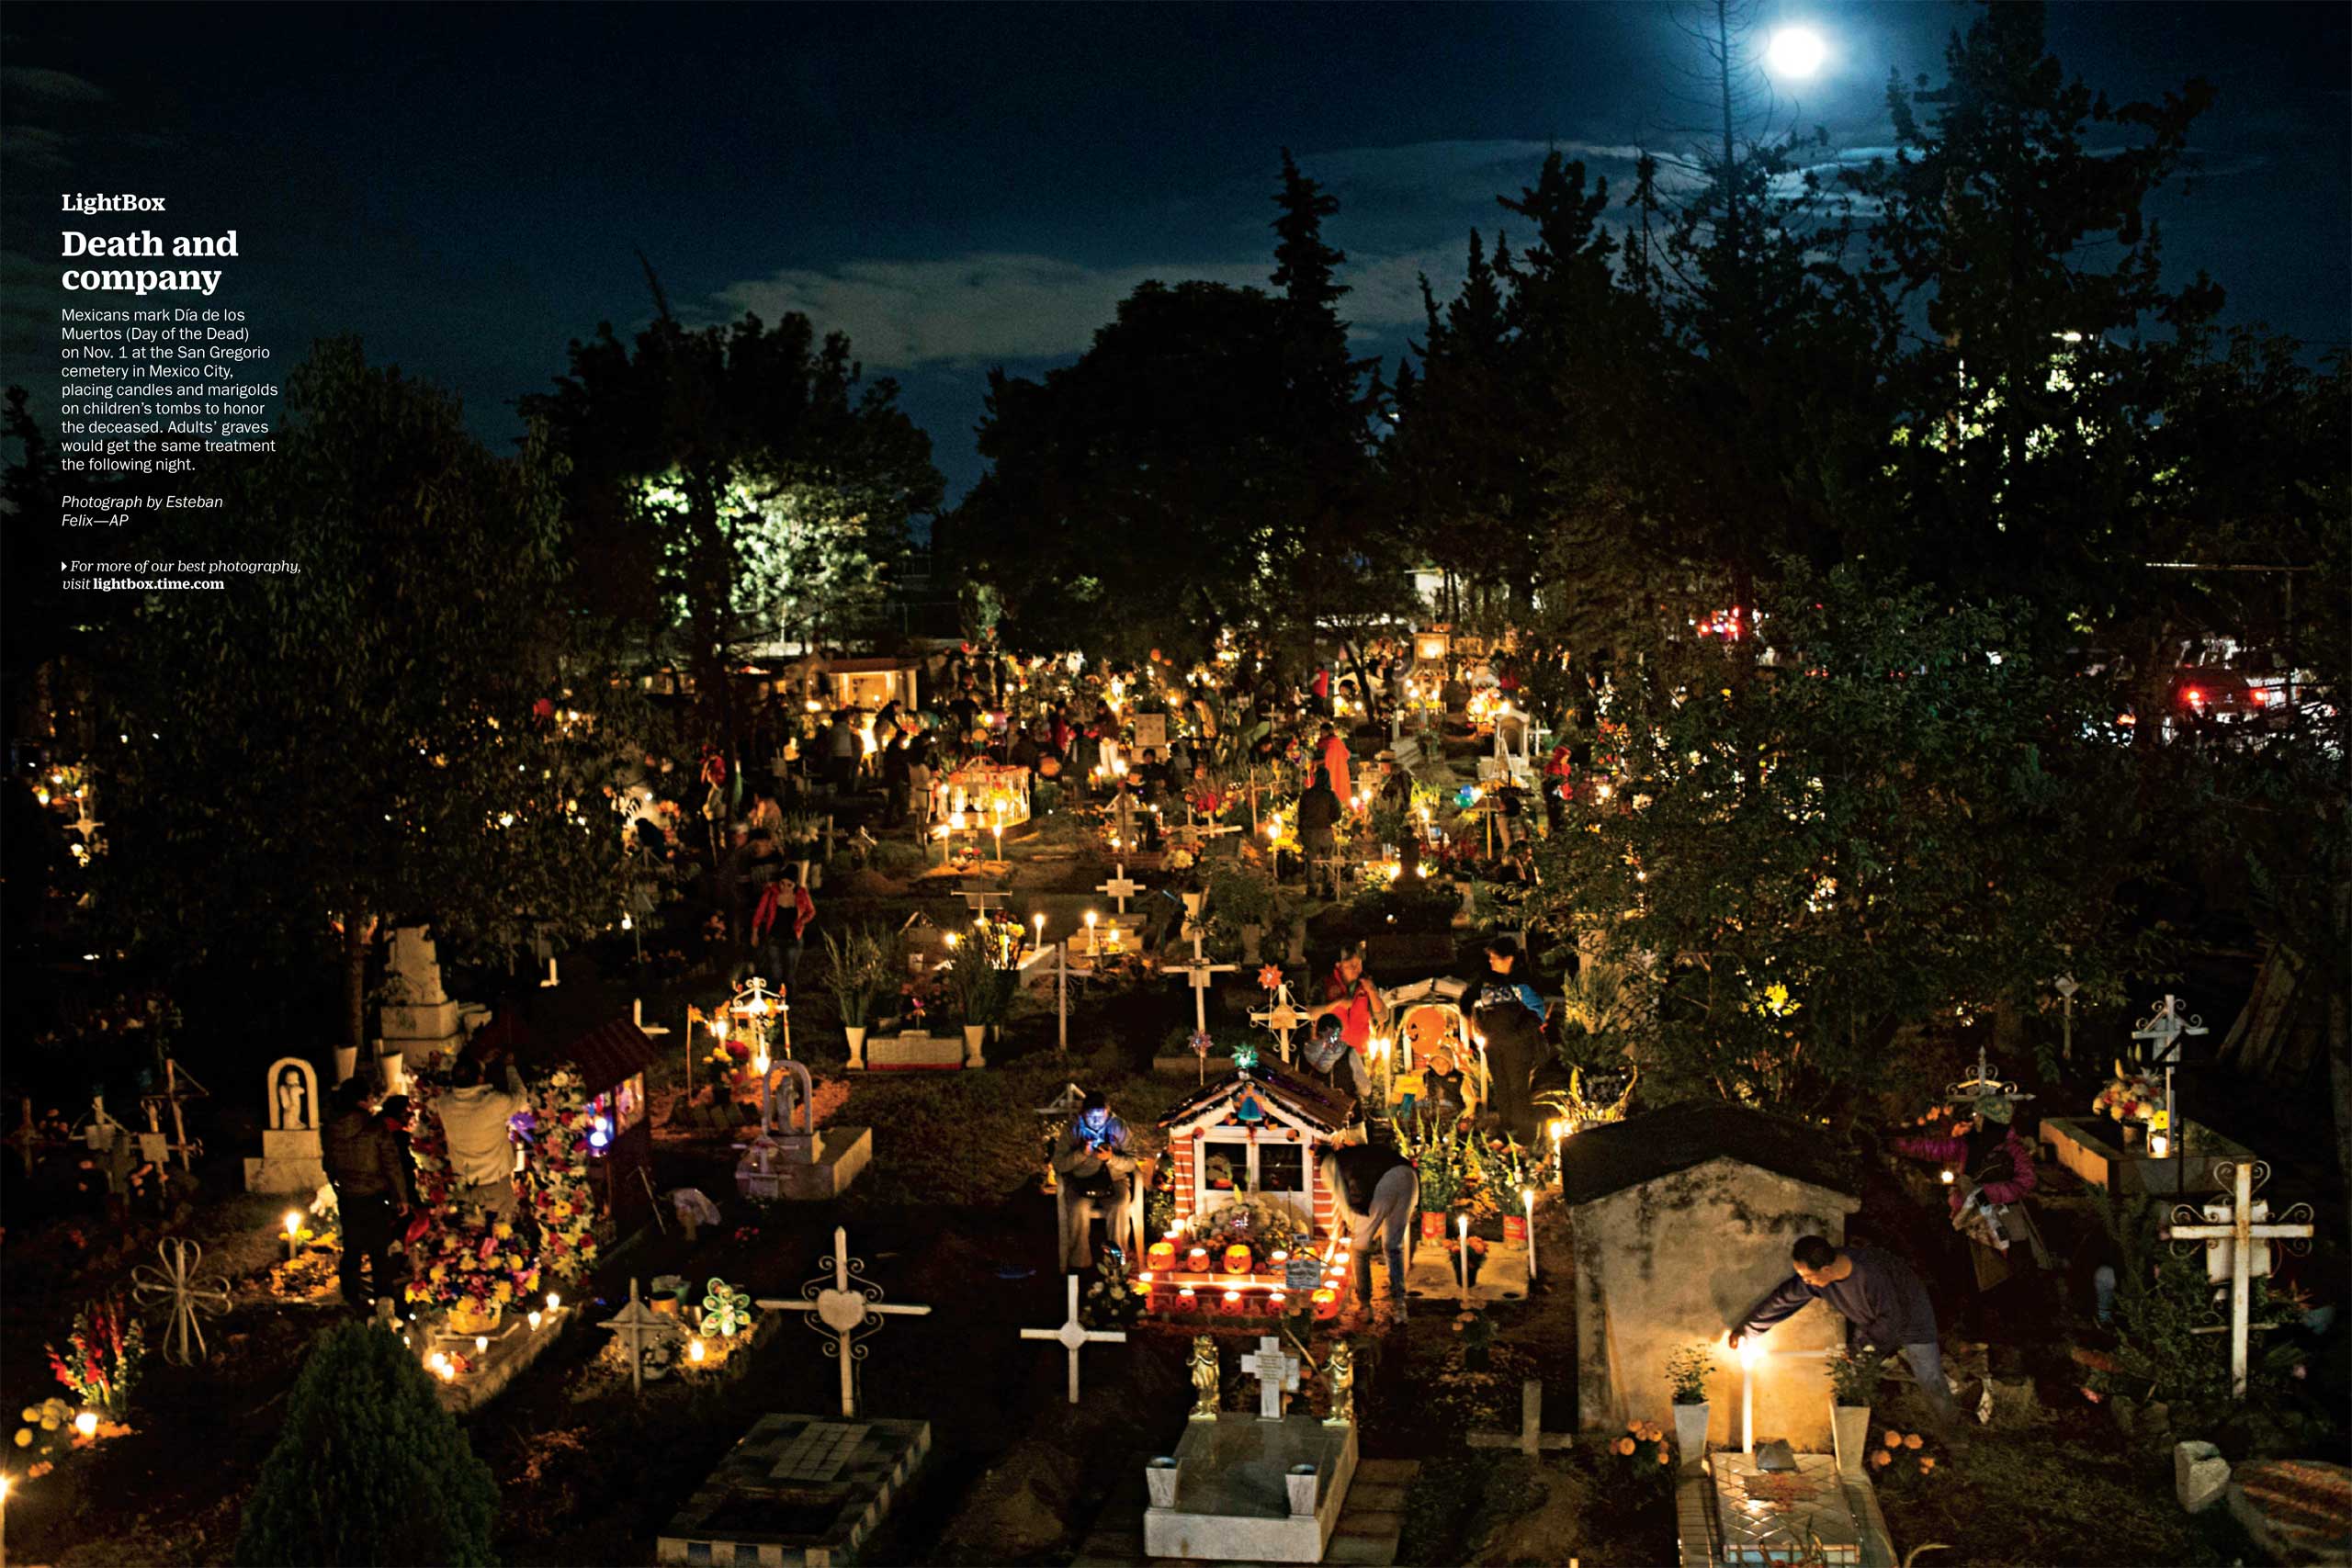 Photograph by Esteban Felix—APMexicans mark Día de los Muertos (Day of the Dead) on Nov. 1 at the San Gregorio cemetery in Mexico City, placing candles and marigolds on children's tombs to honor the deceased. Adults' graves would get the same treatment the following night. (TIME issue November 16, 2015)